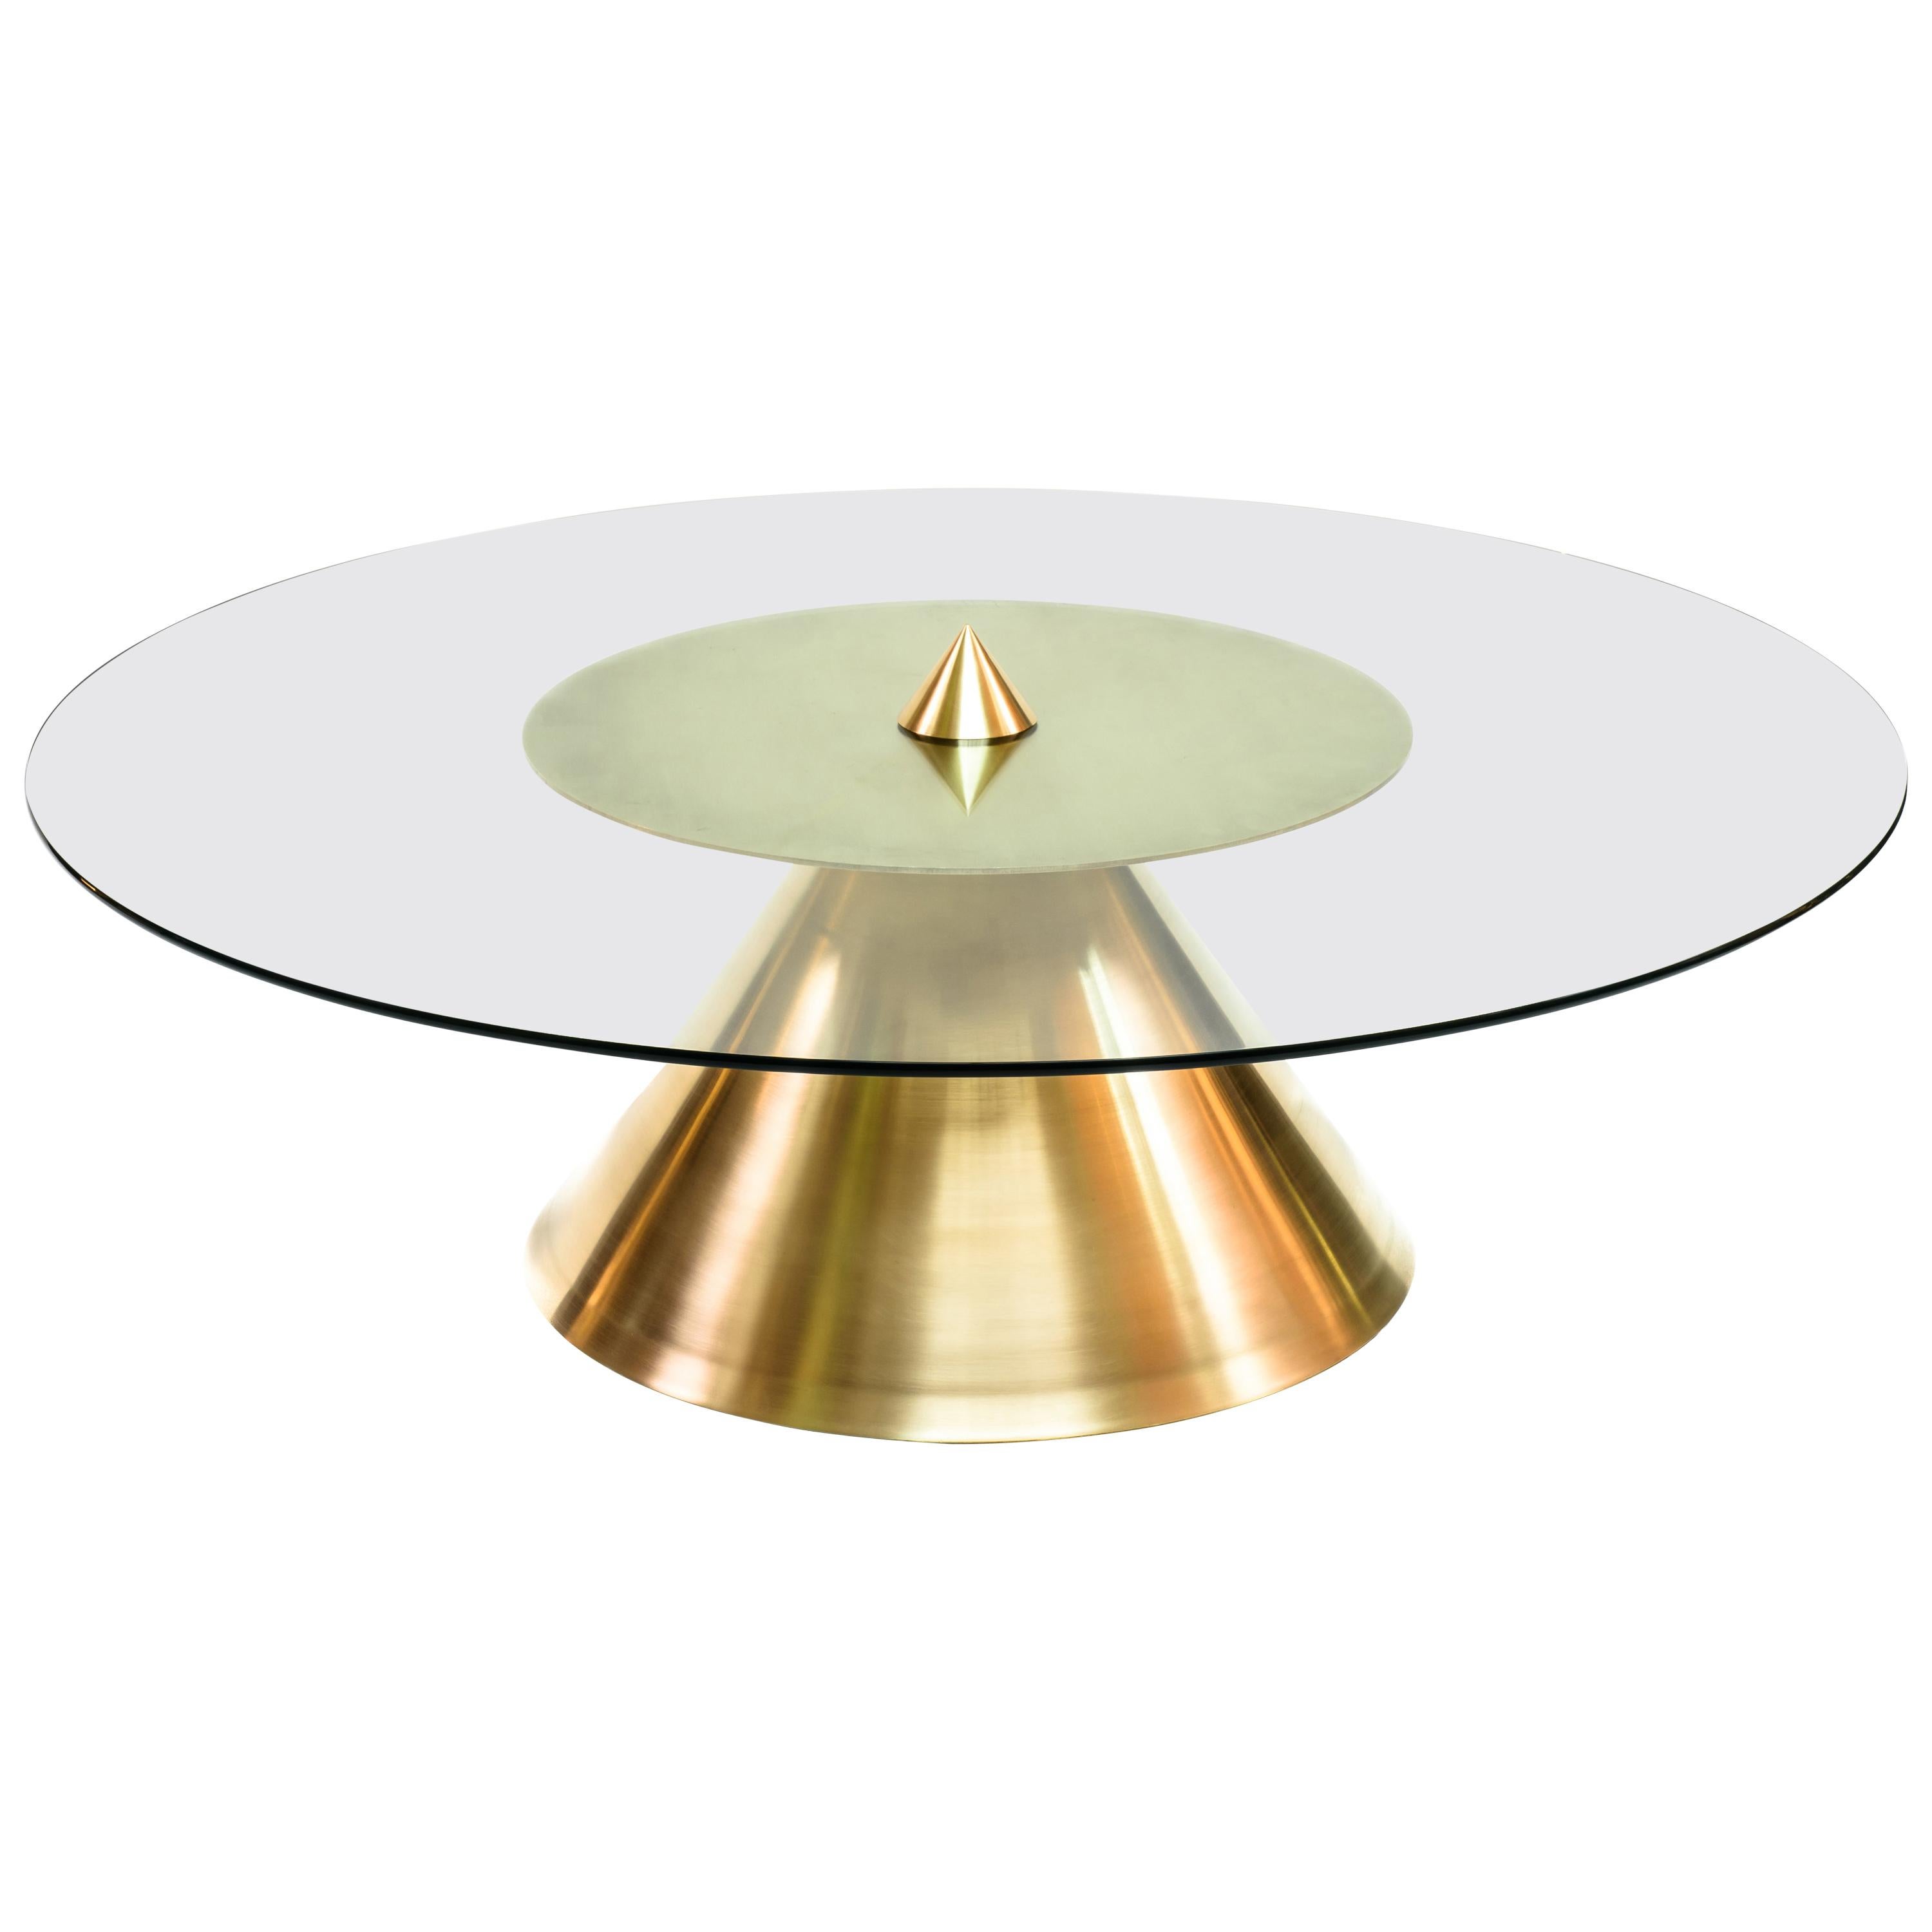 XL Halo Coffee Table w/ Polished Spun Bronze Base and Tempered Glass Top